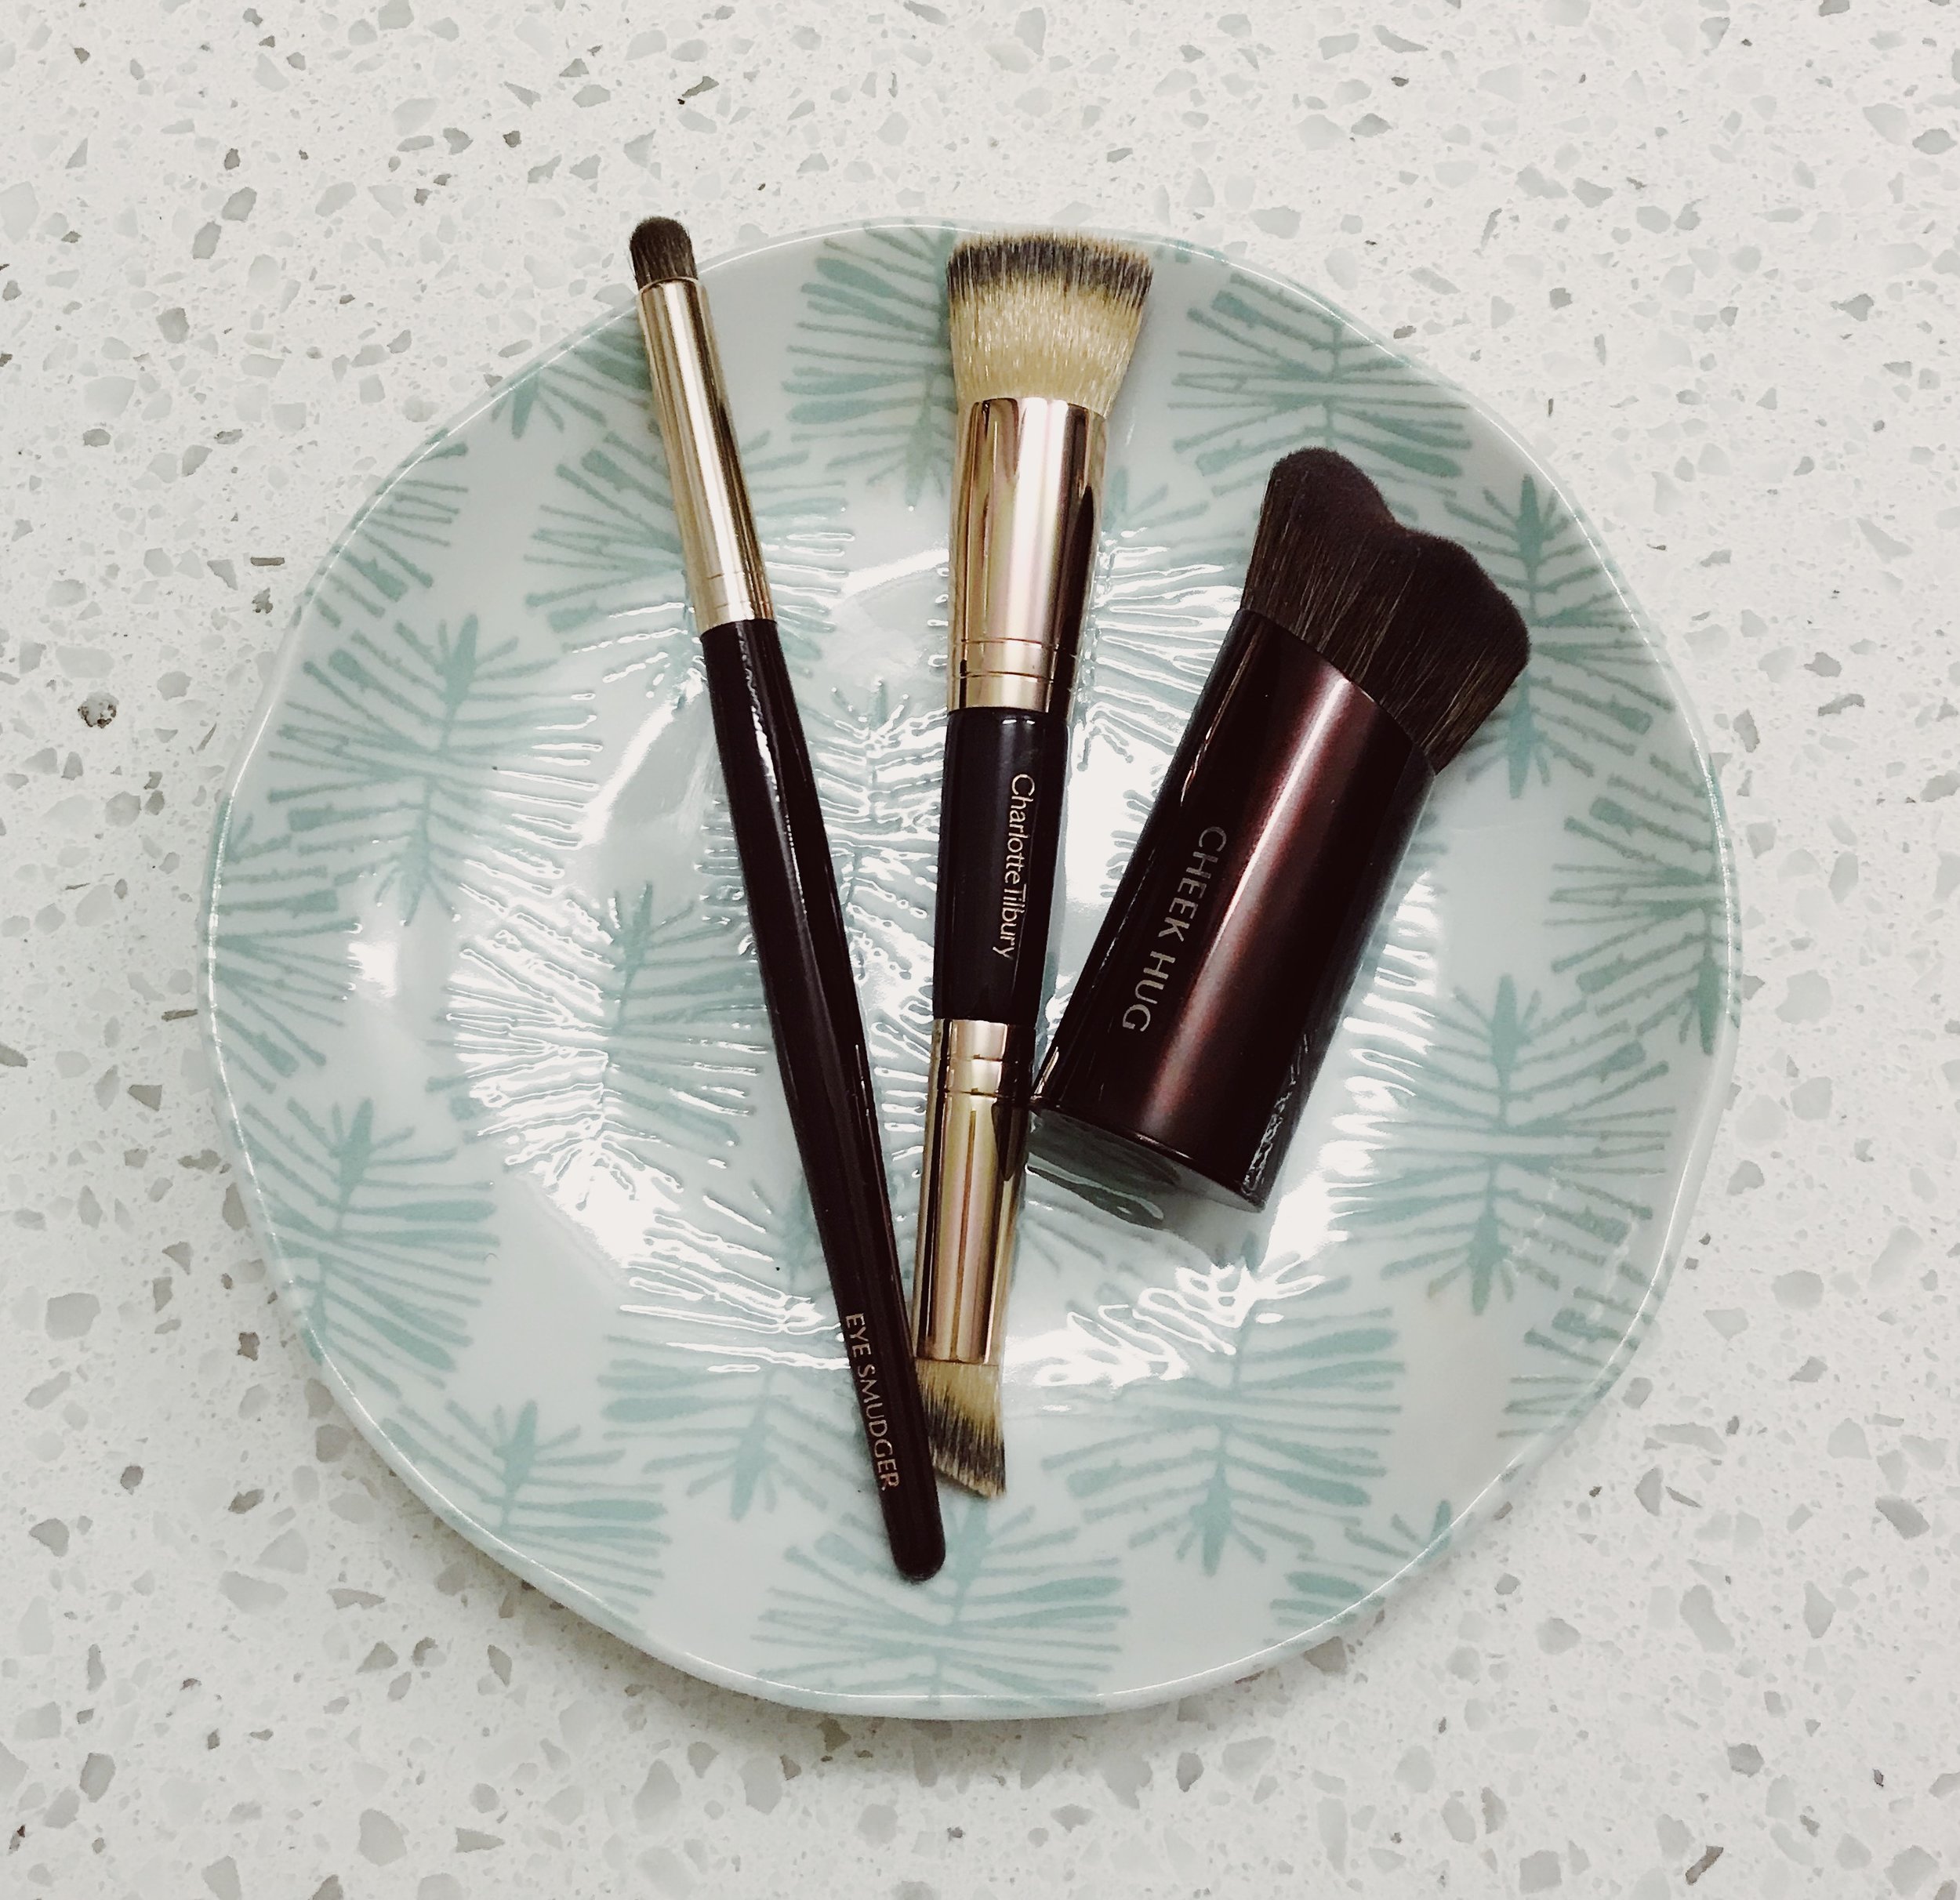 Gom Mexico Brein Charlotte Tilbury Makeup Brush Review — All That Glitters